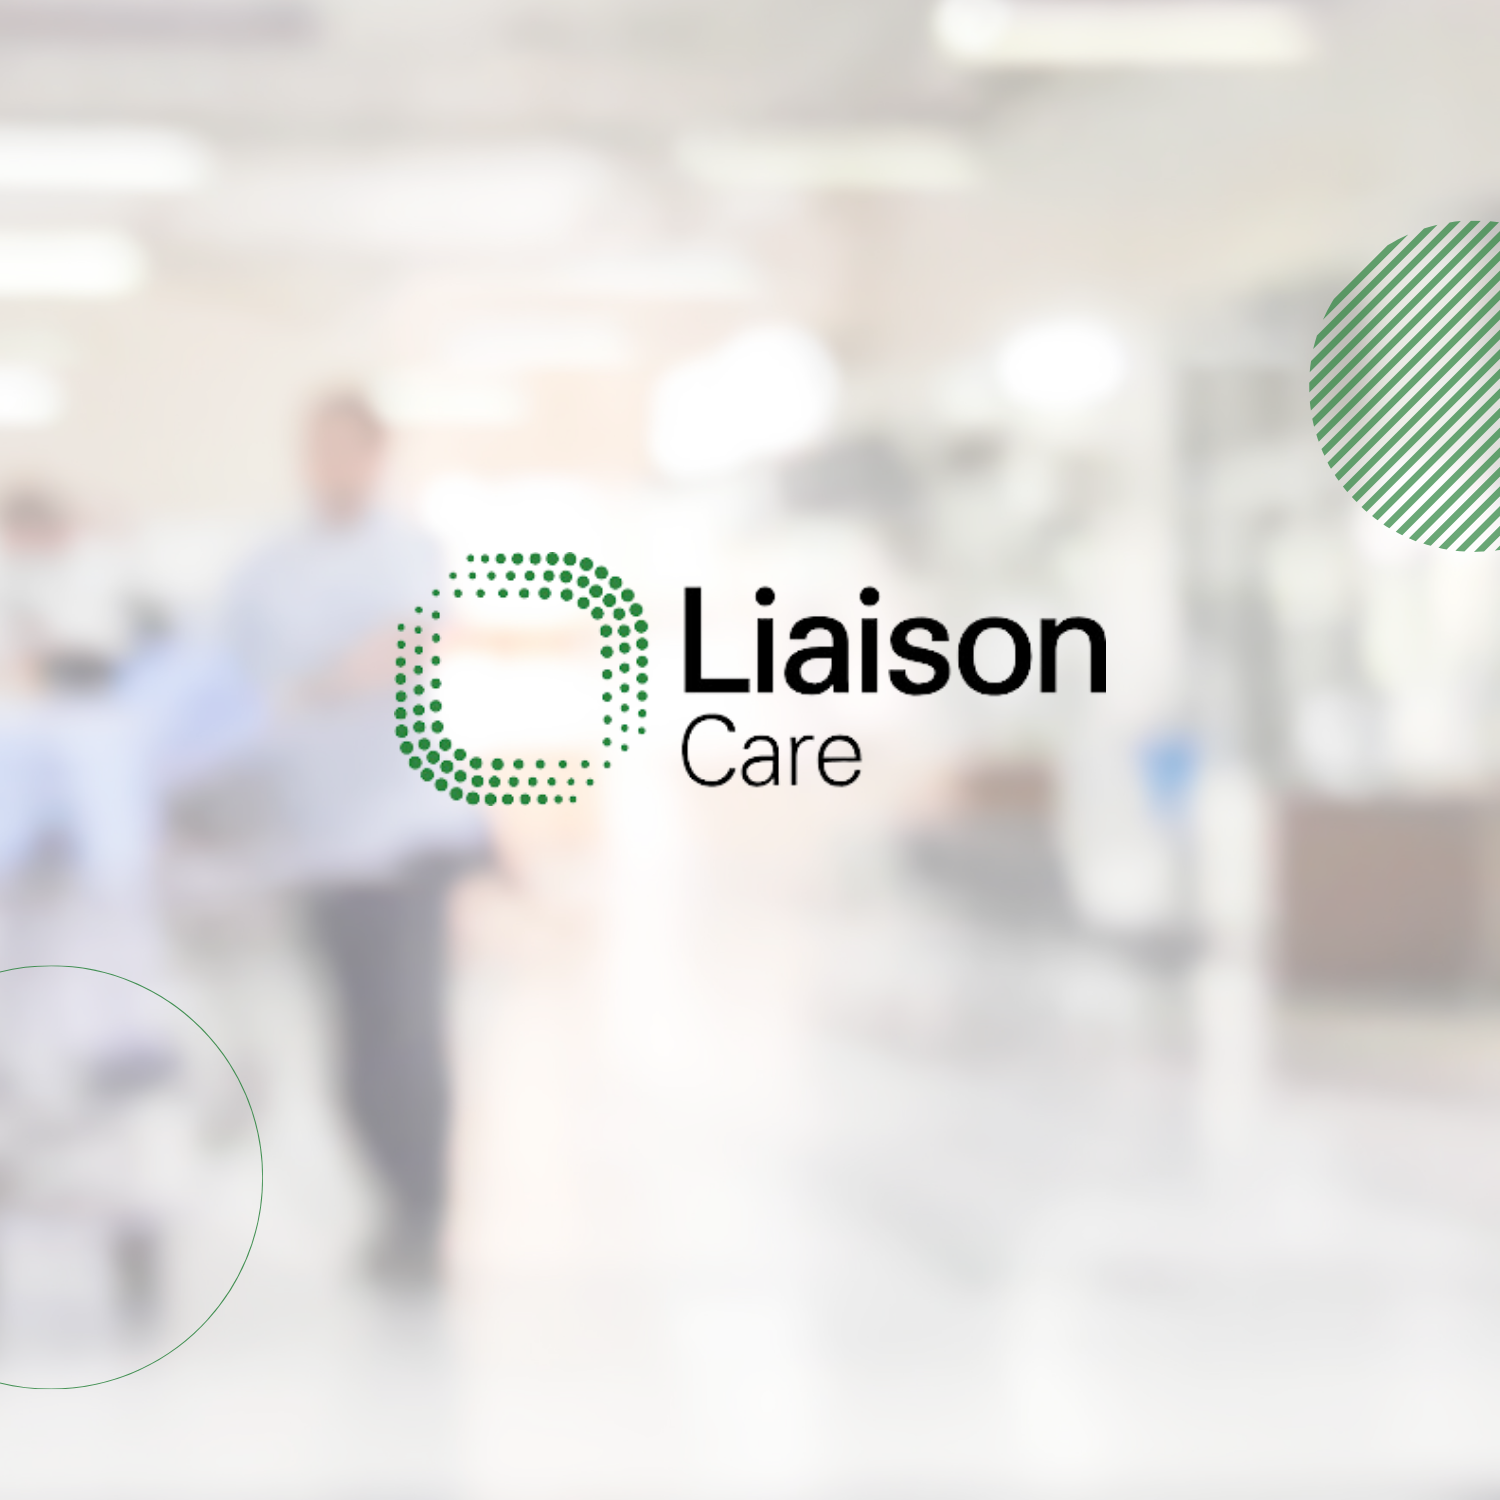 Liaison Care in 2024: The Only Way Is Up!